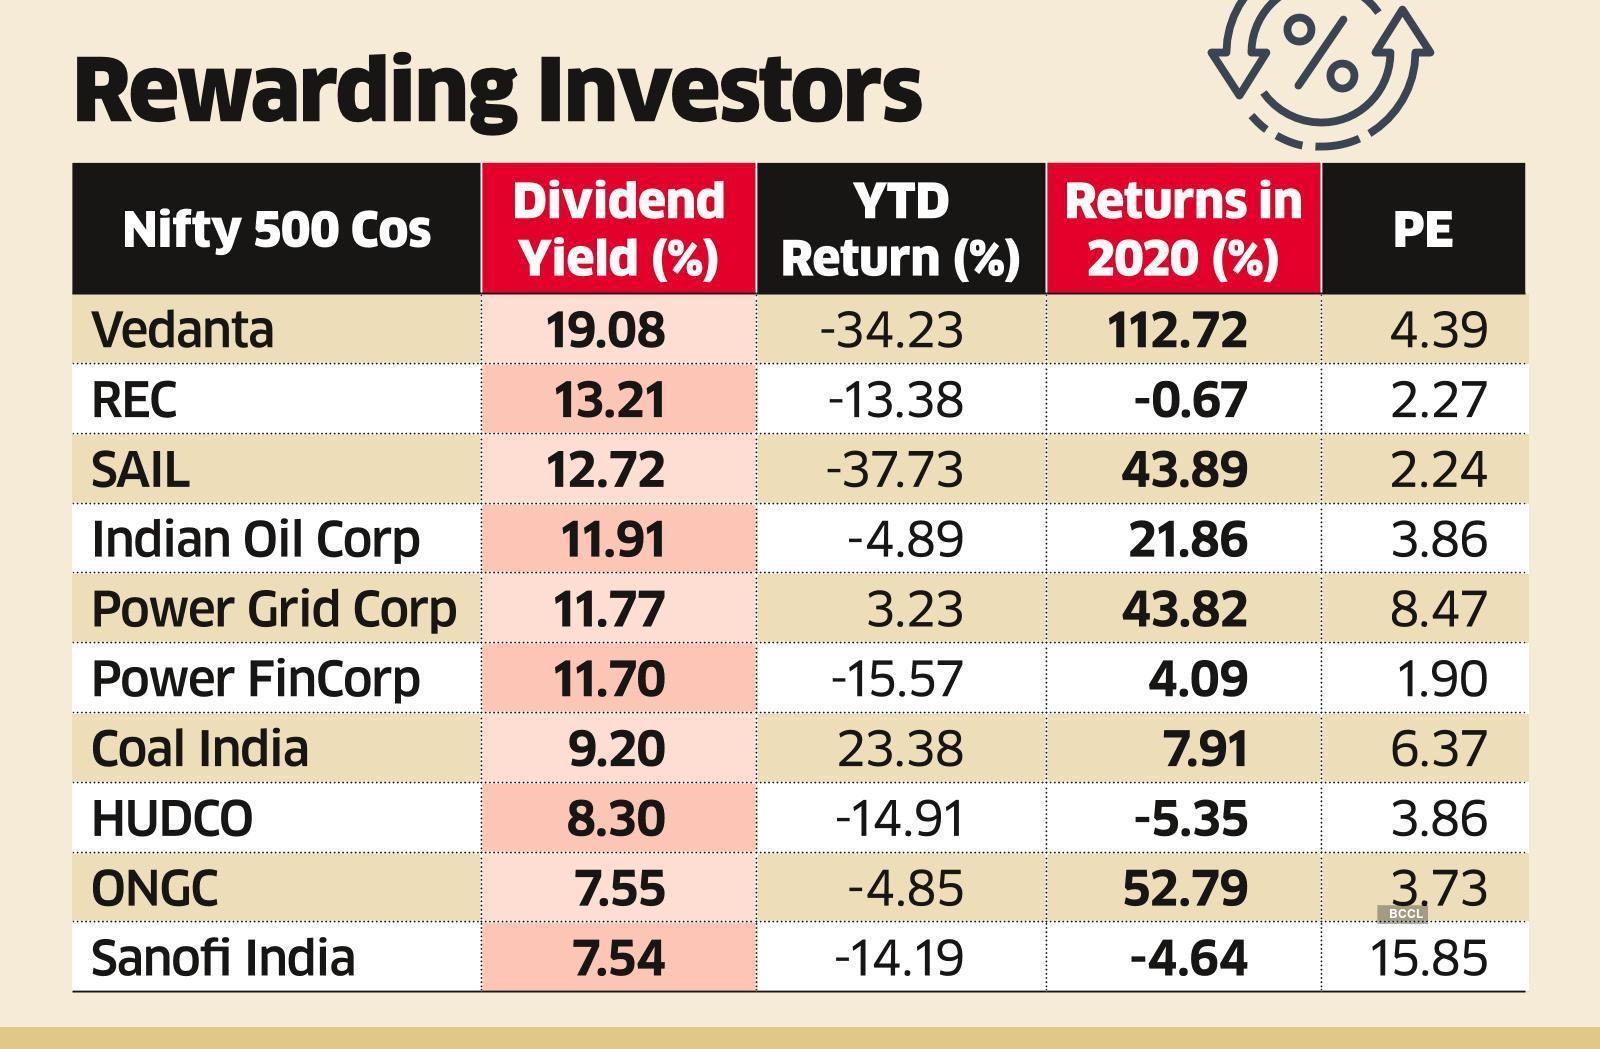 dividend yields: Market outlook uncertain, stocks with high dividend yields seen bet - The Economic Times